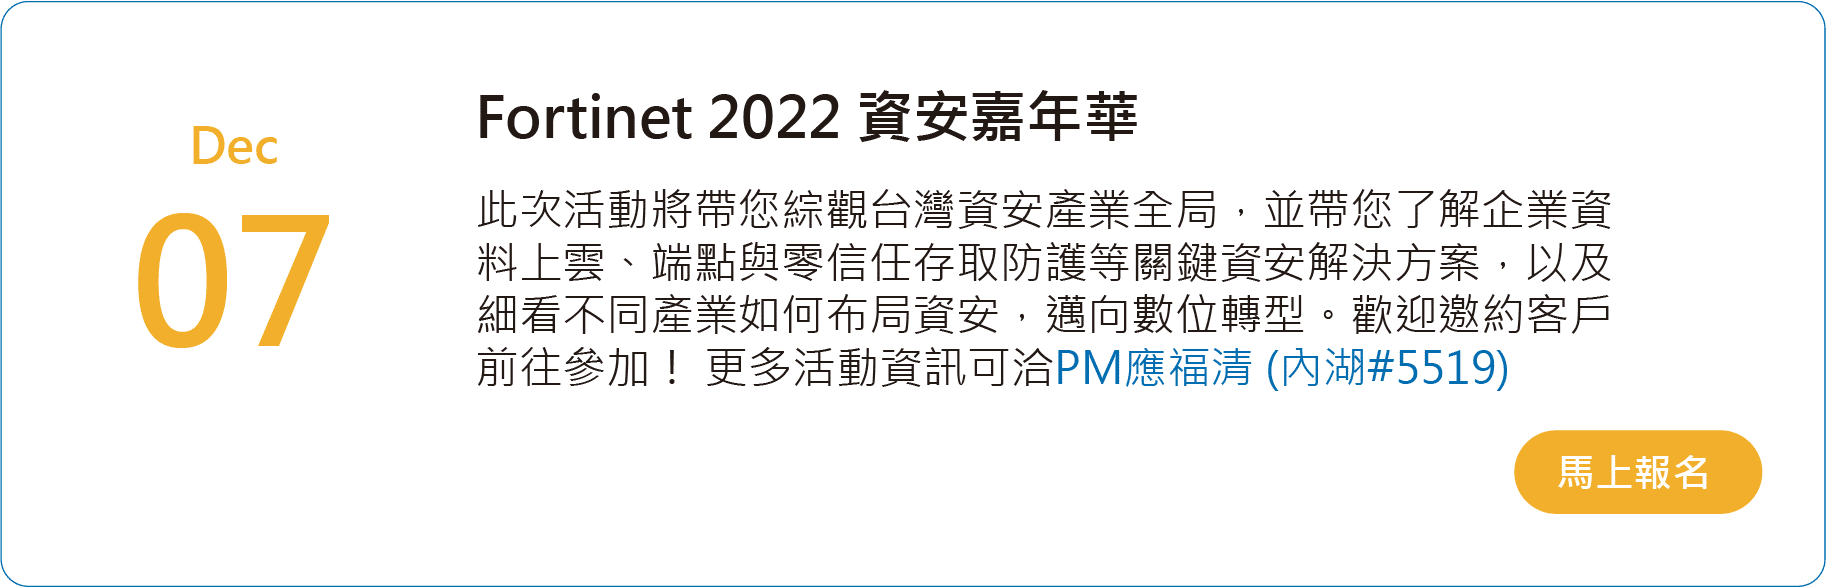 2022 Fortinet 資安嘉年華